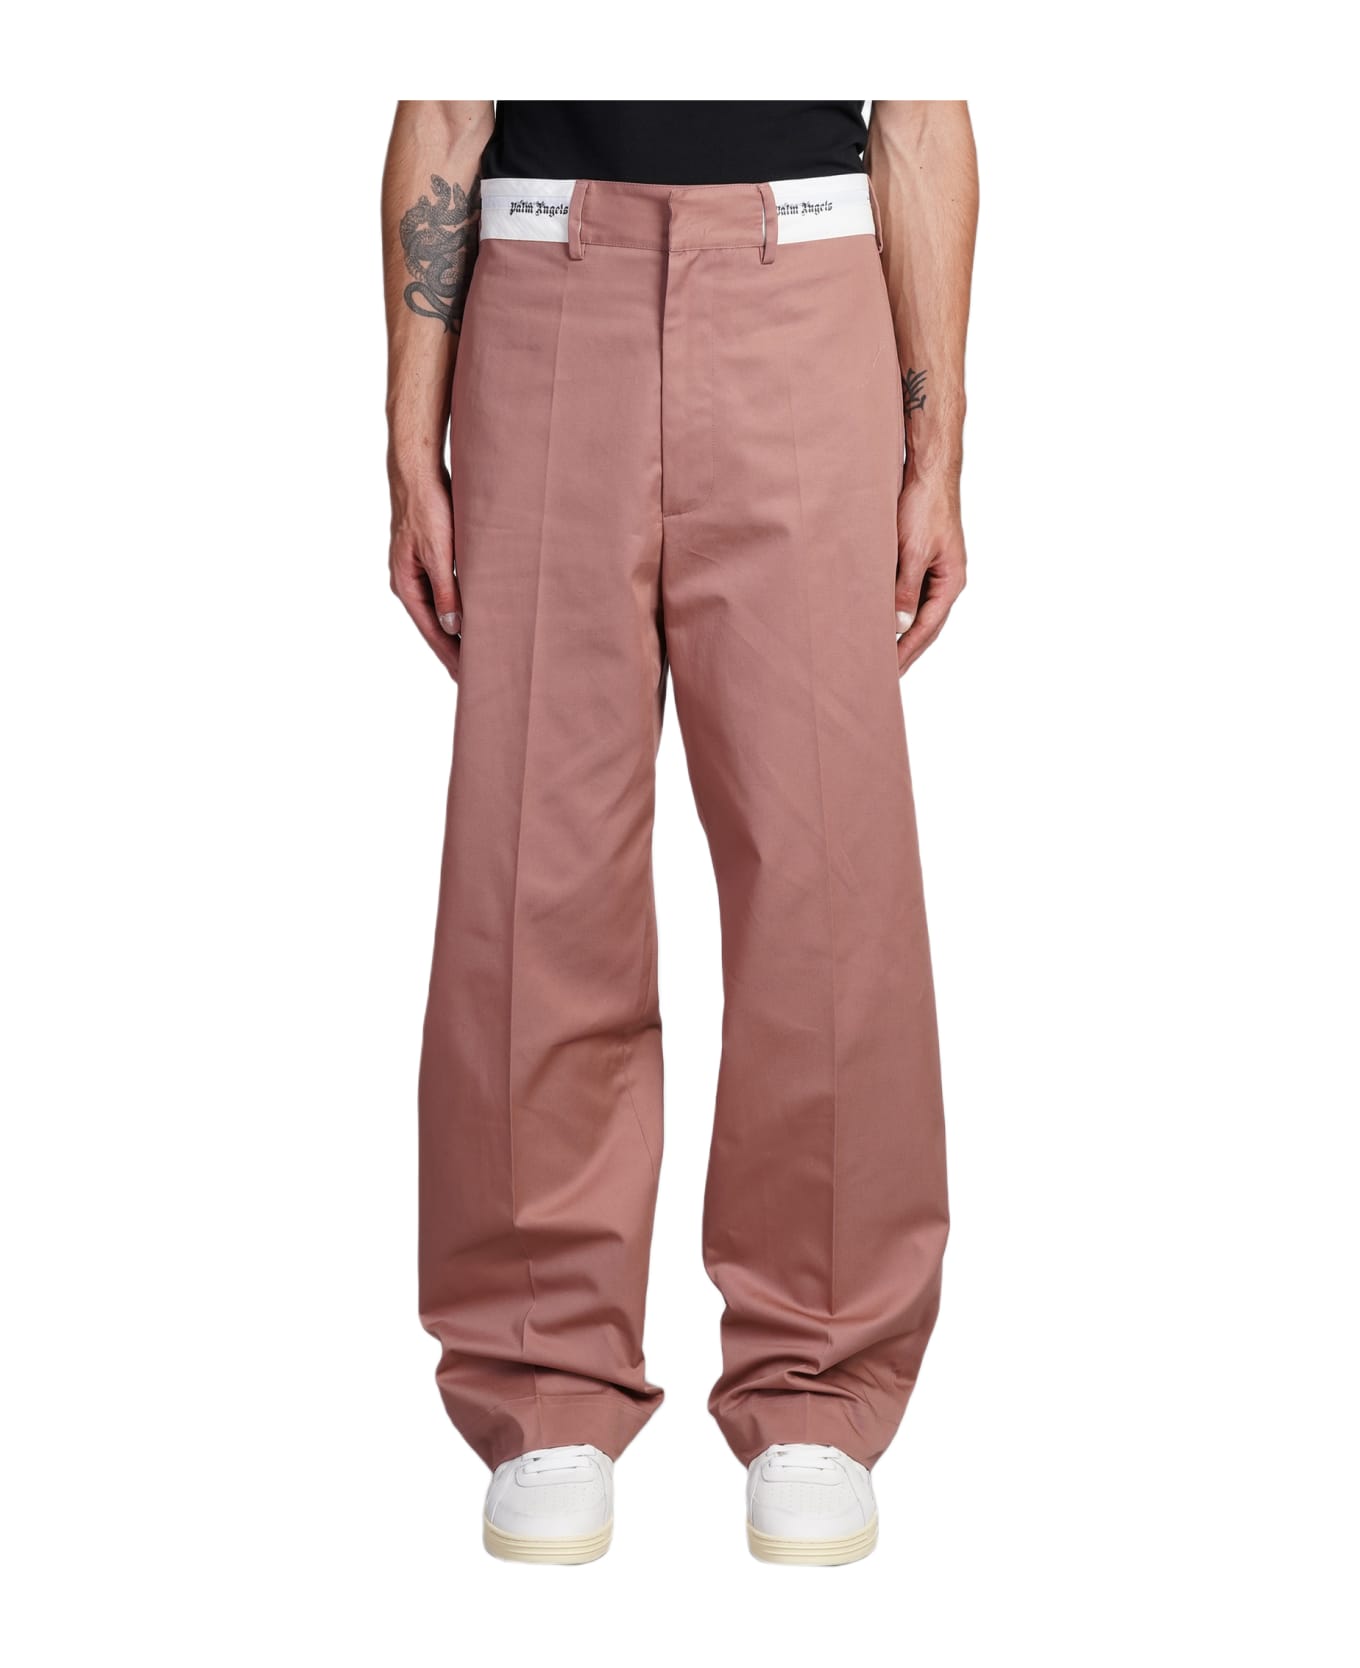 Palm Angels Pants In Rose-pink Cotton - rose-pink ボトムス